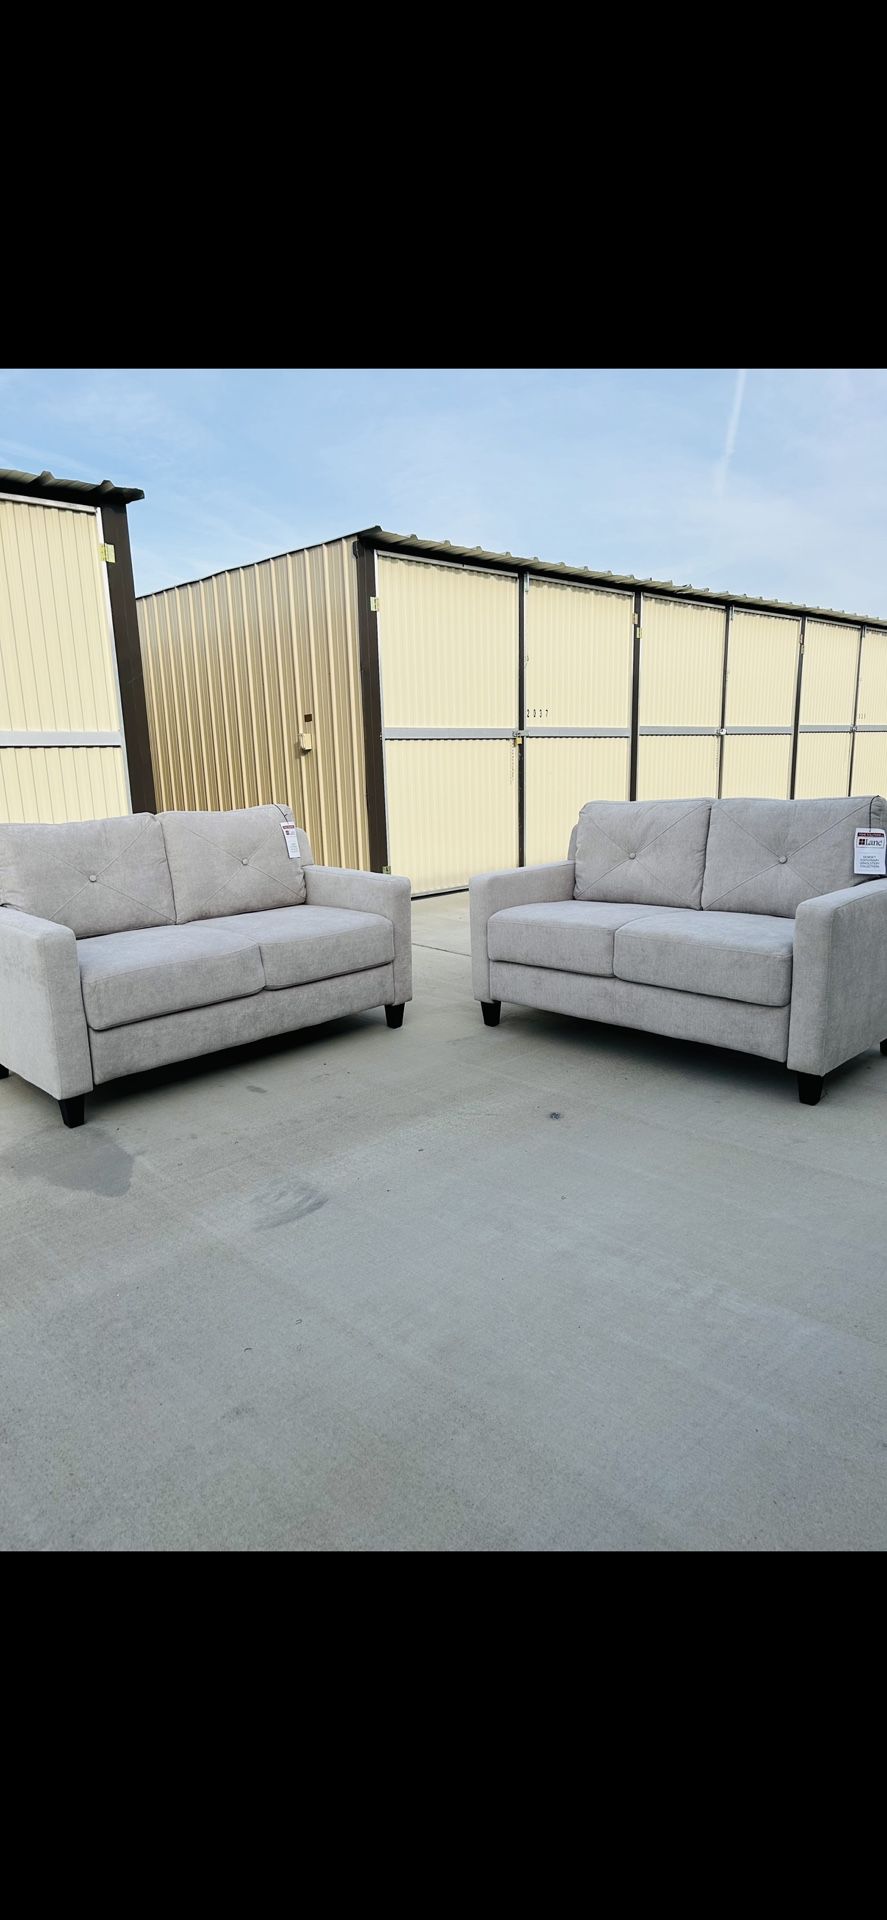 2 Band New Taupe/Light Beige Loveseats 